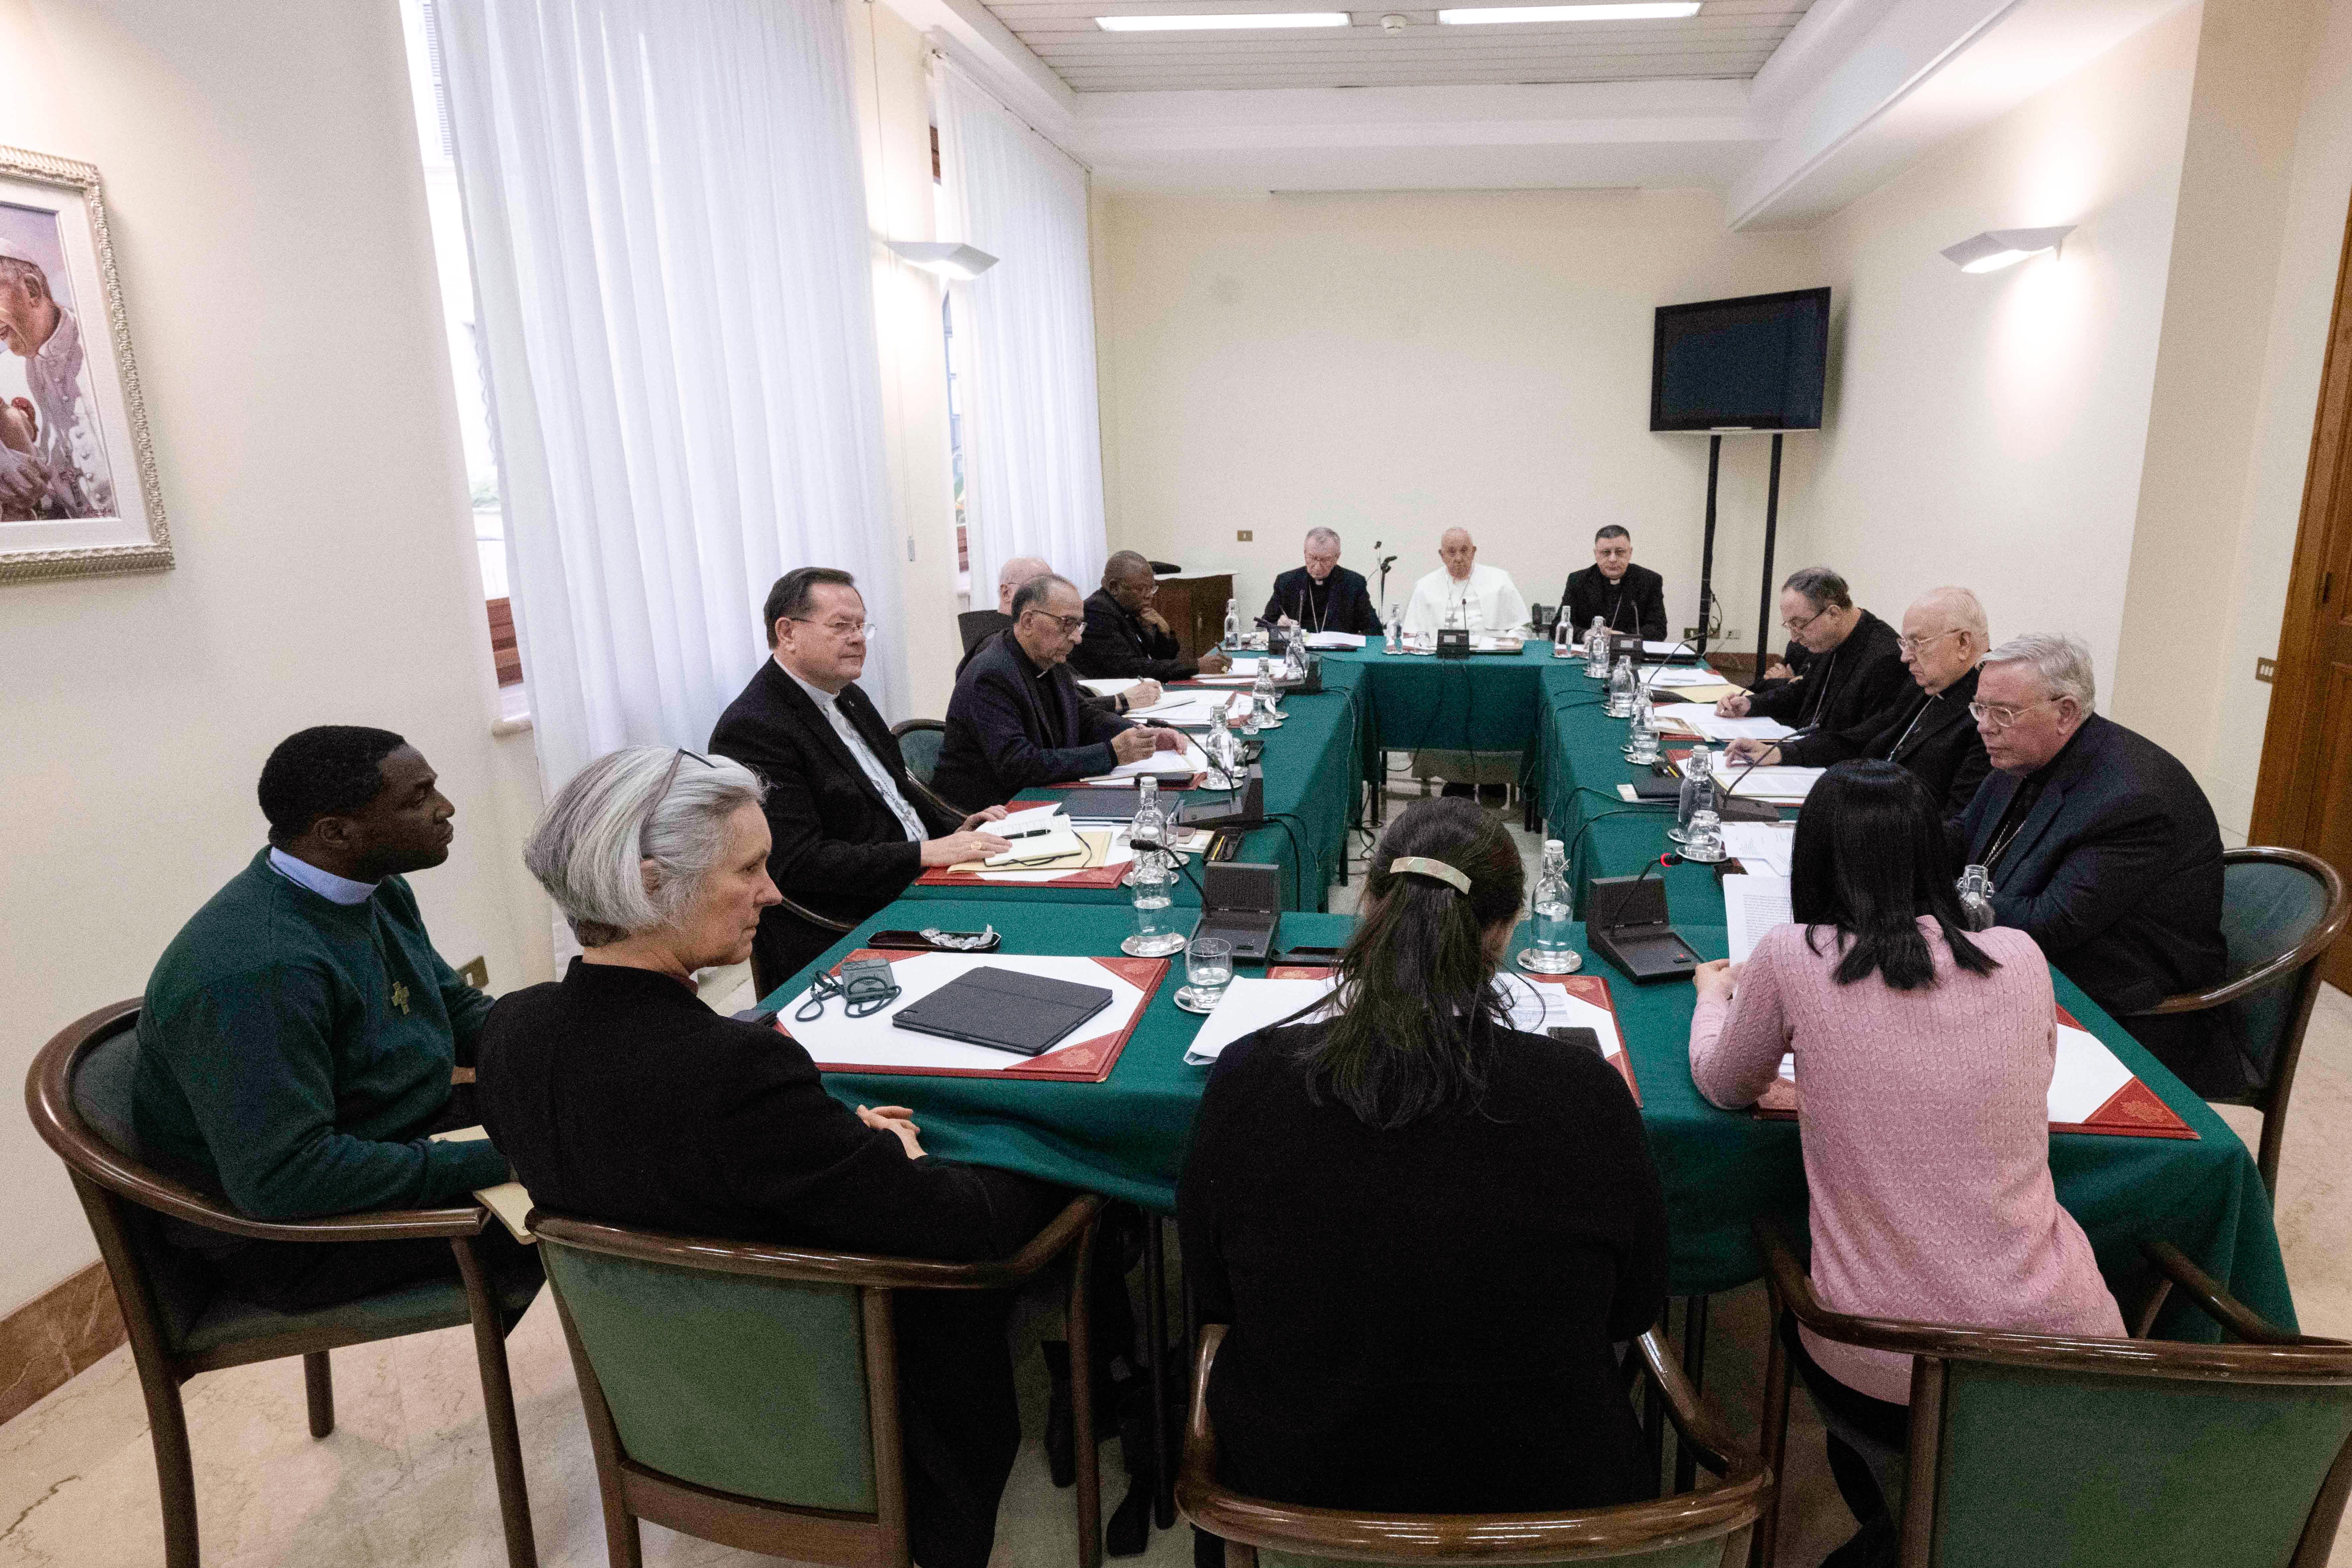 February meeting of Pope Francis and Council of Cardinals